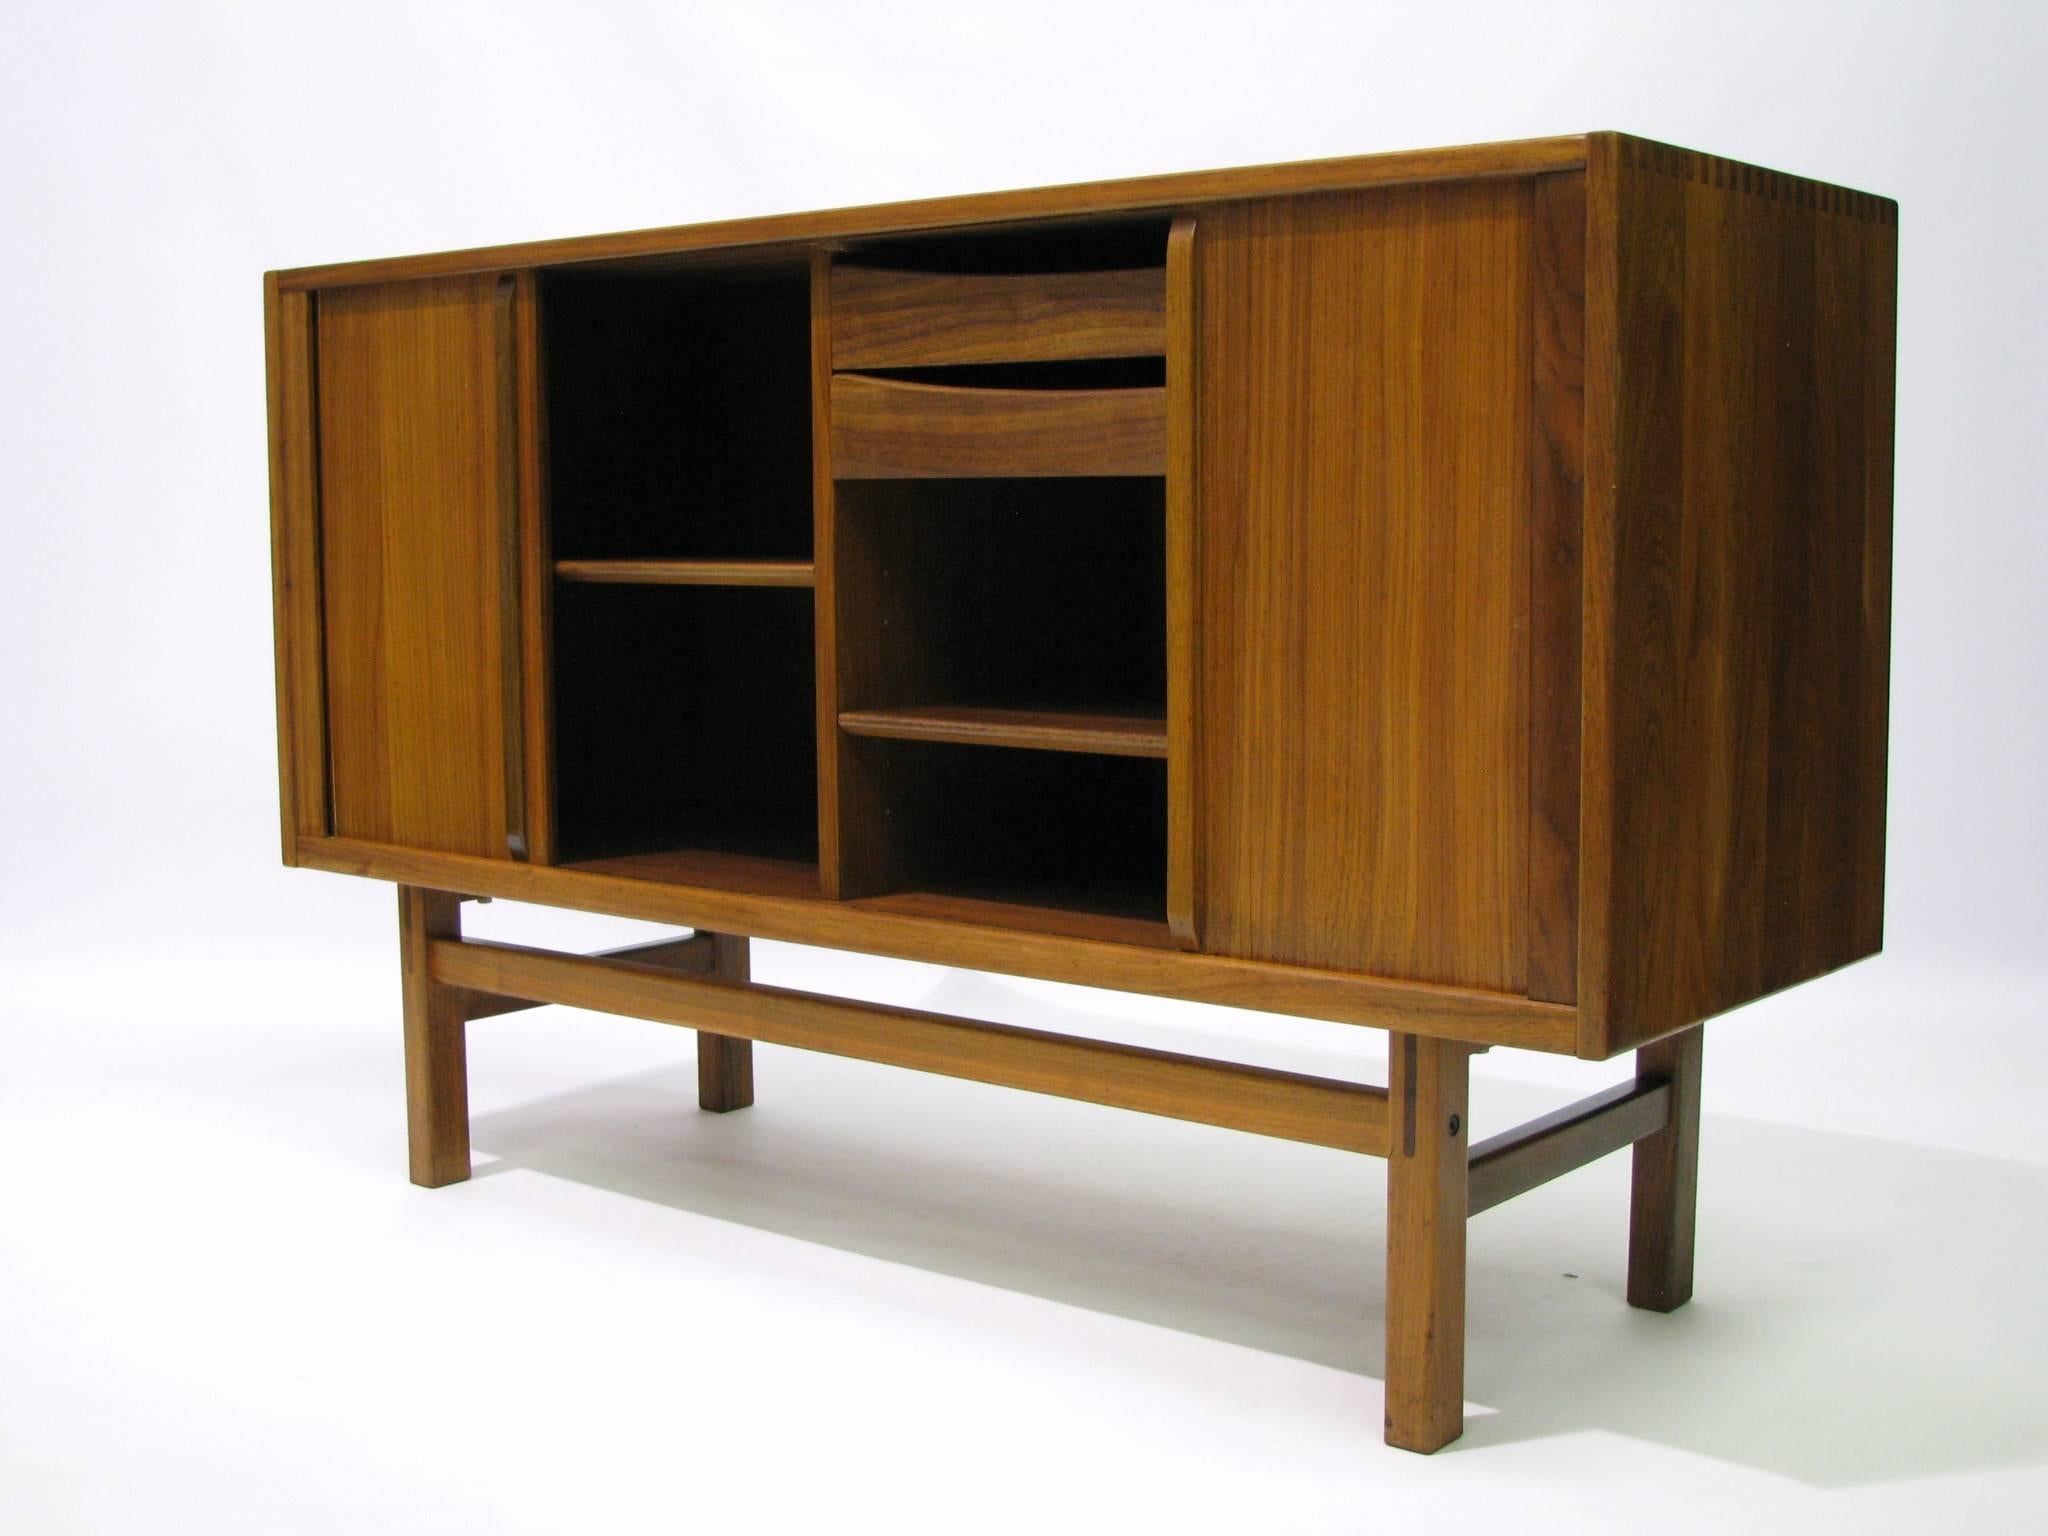 Teak sideboard designed by Nils Jönsson for the Swedish firm Troeds Bjärnum in the 1960s. Attractively grained wood with exposed dovetails on the top corners. Tambour doors reveal an adjustable shelf on the left, and two drawers, one for flatware